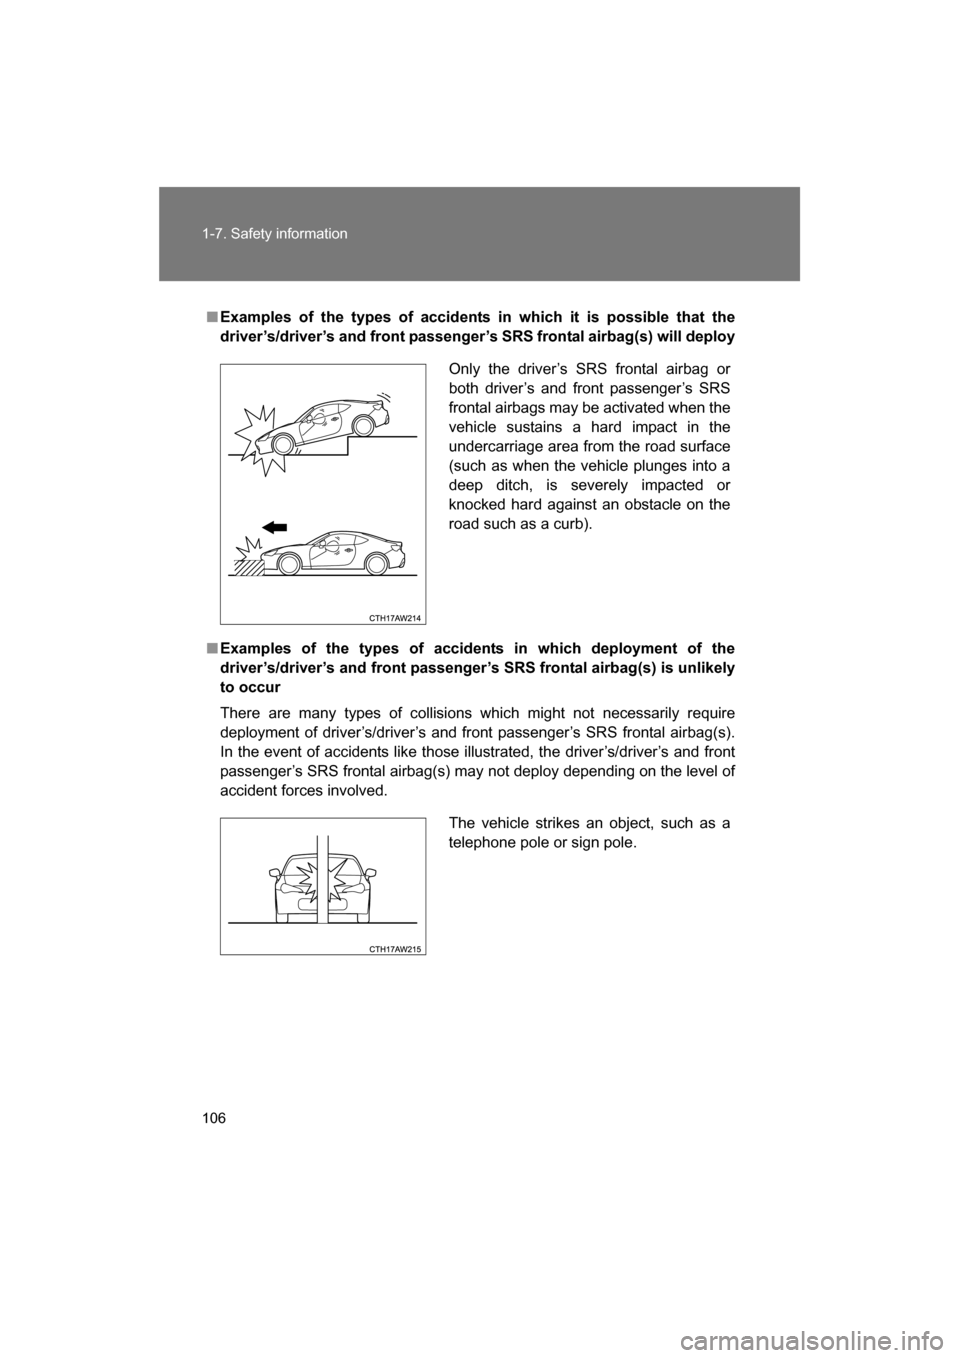 SUBARU BRZ 2014 1.G Owners Manual 106
1-7. Safety information
■Examples of the types of accidents in which it is possible that the 
driver’s/driver’s and front passenger’s SRS frontal airbag(s) will deploy
■Examples of the t